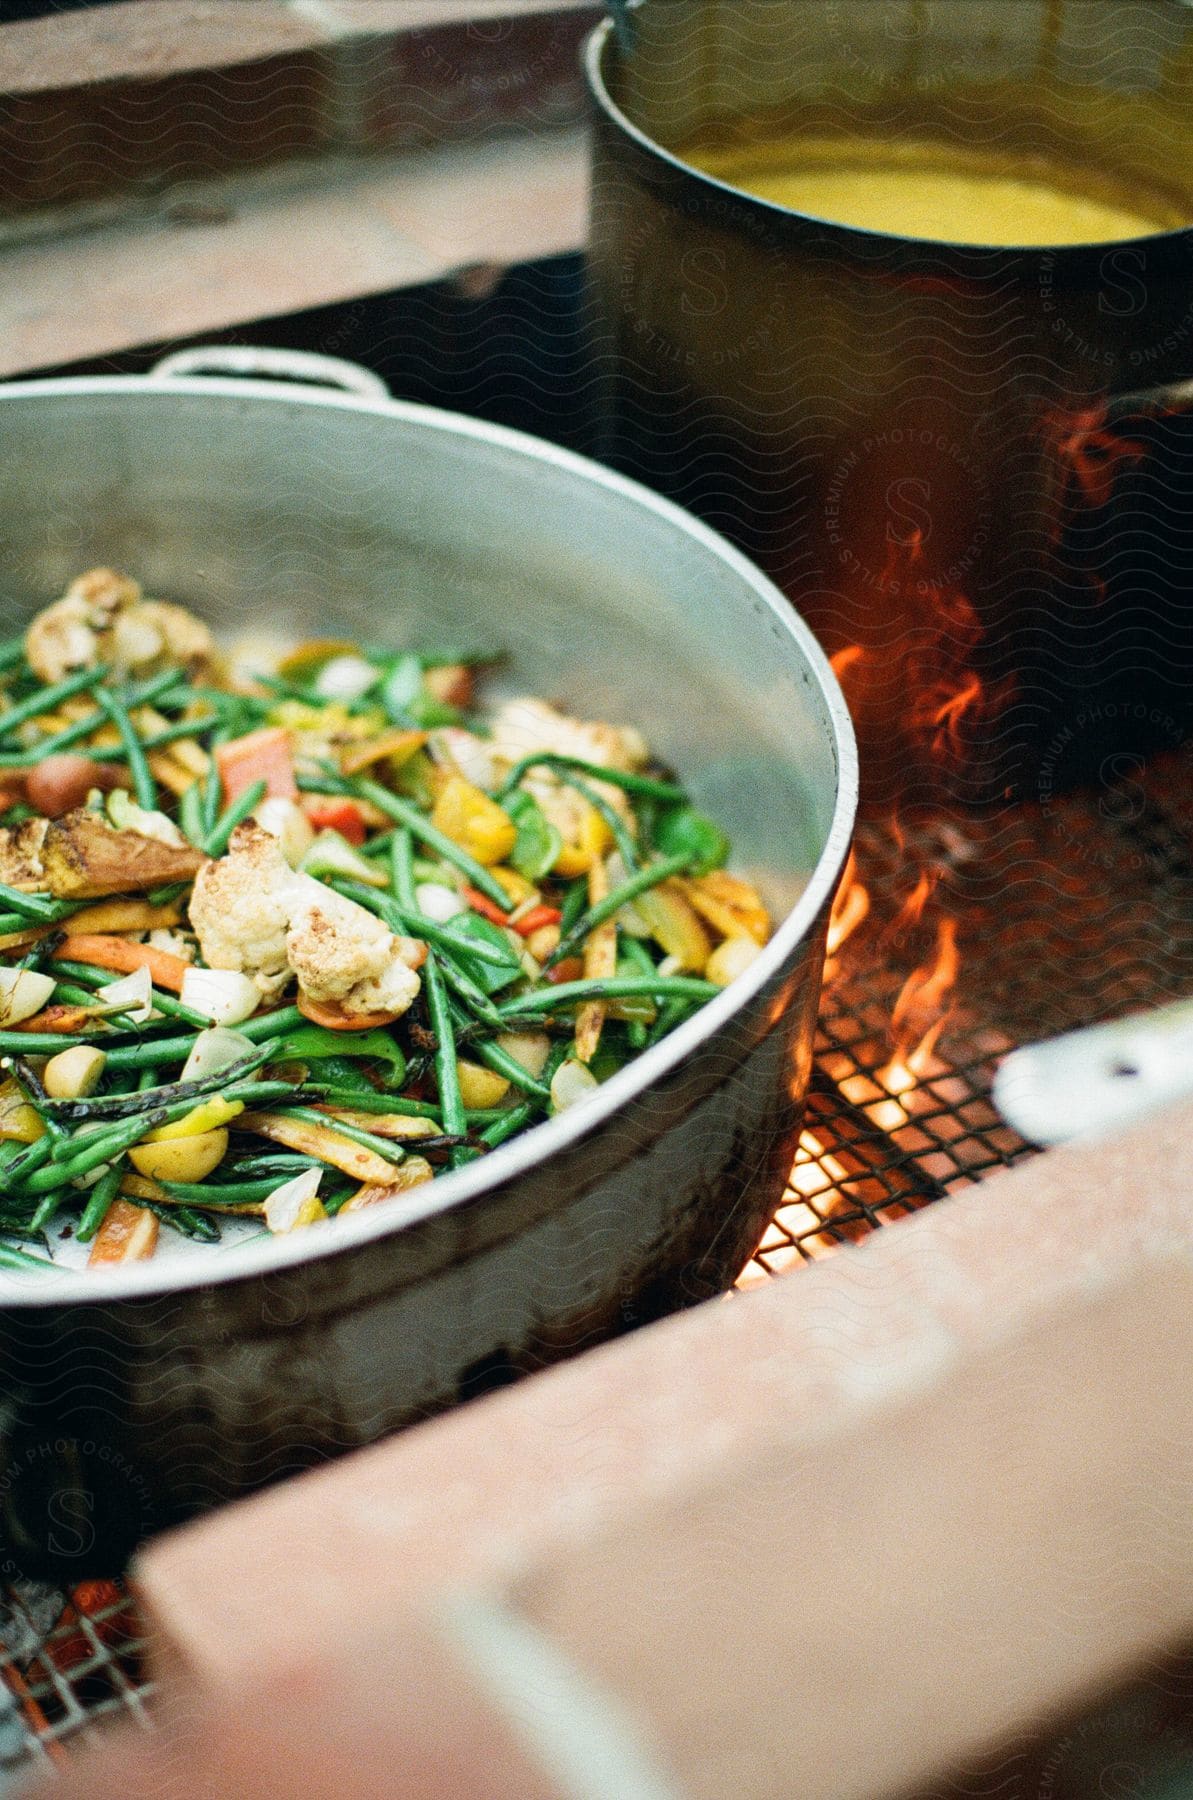 Food being cooked on a stove top with flames